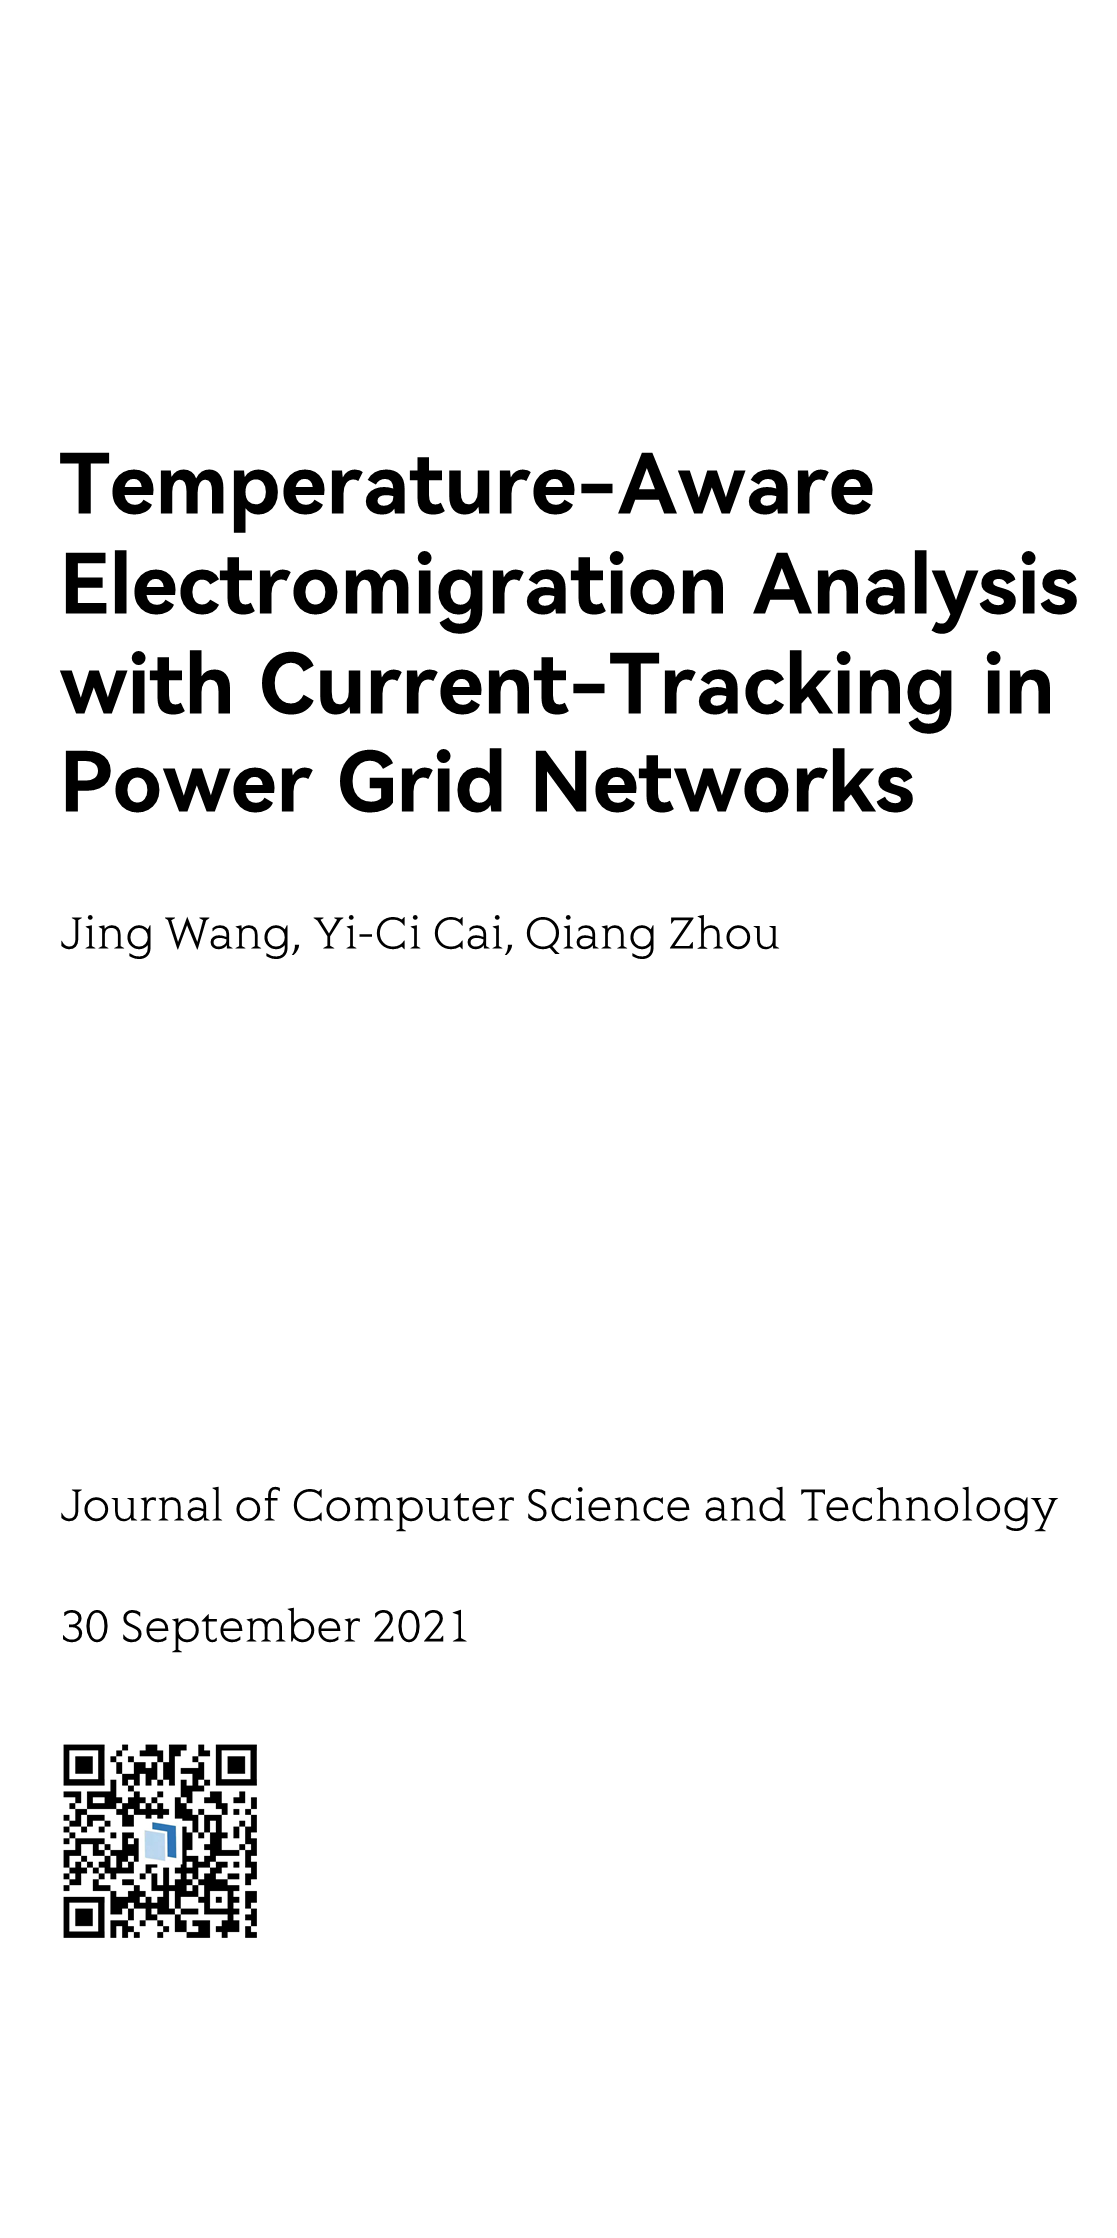 Temperature-Aware Electromigration Analysis with Current-Tracking in Power Grid Networks_1